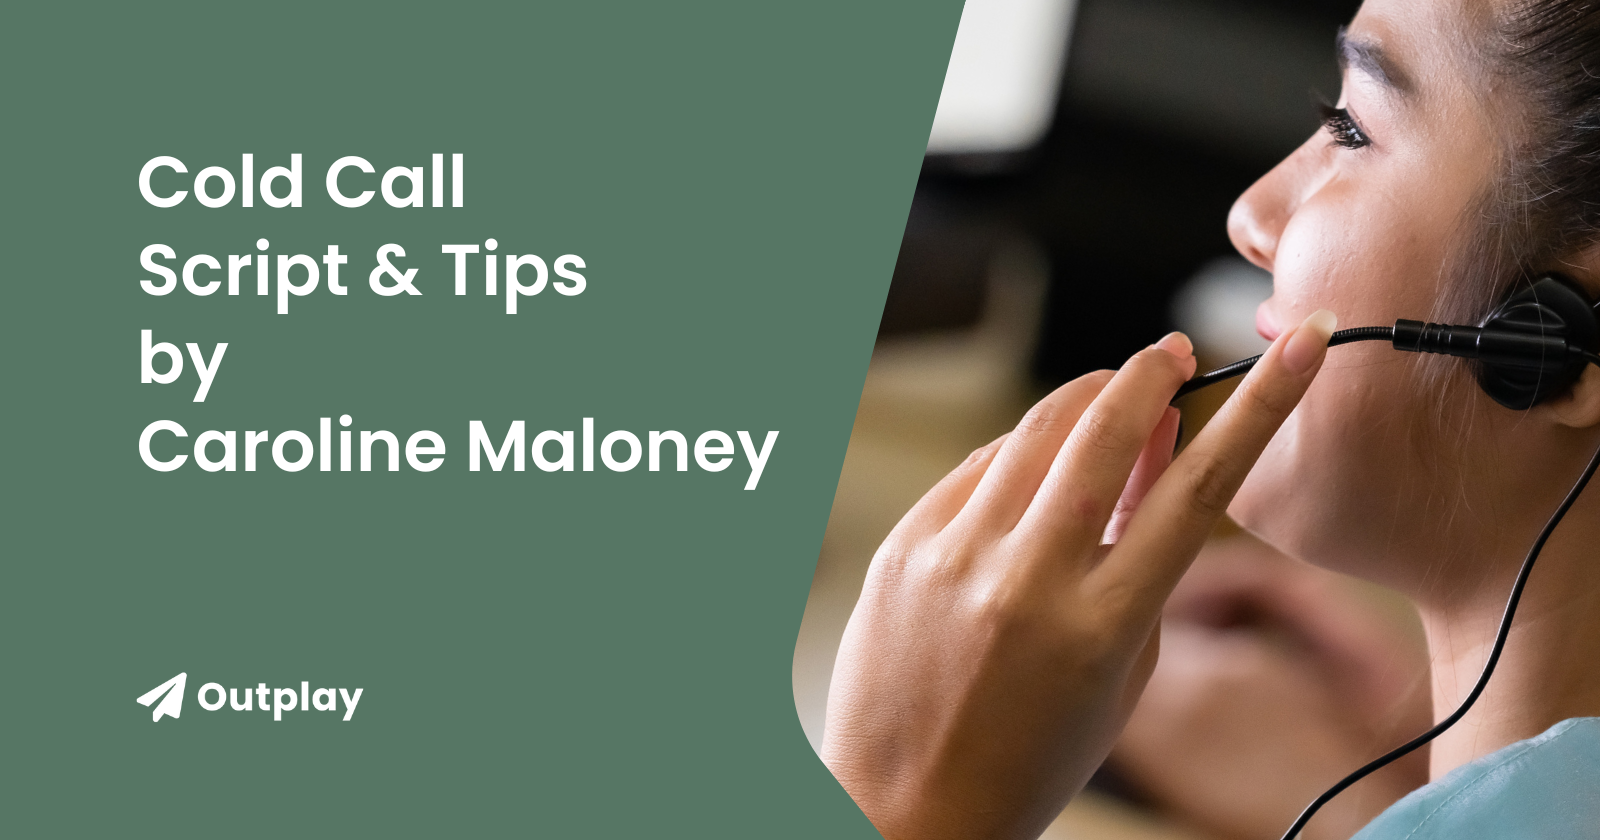 Cold call script & tips from Caroline Maloney